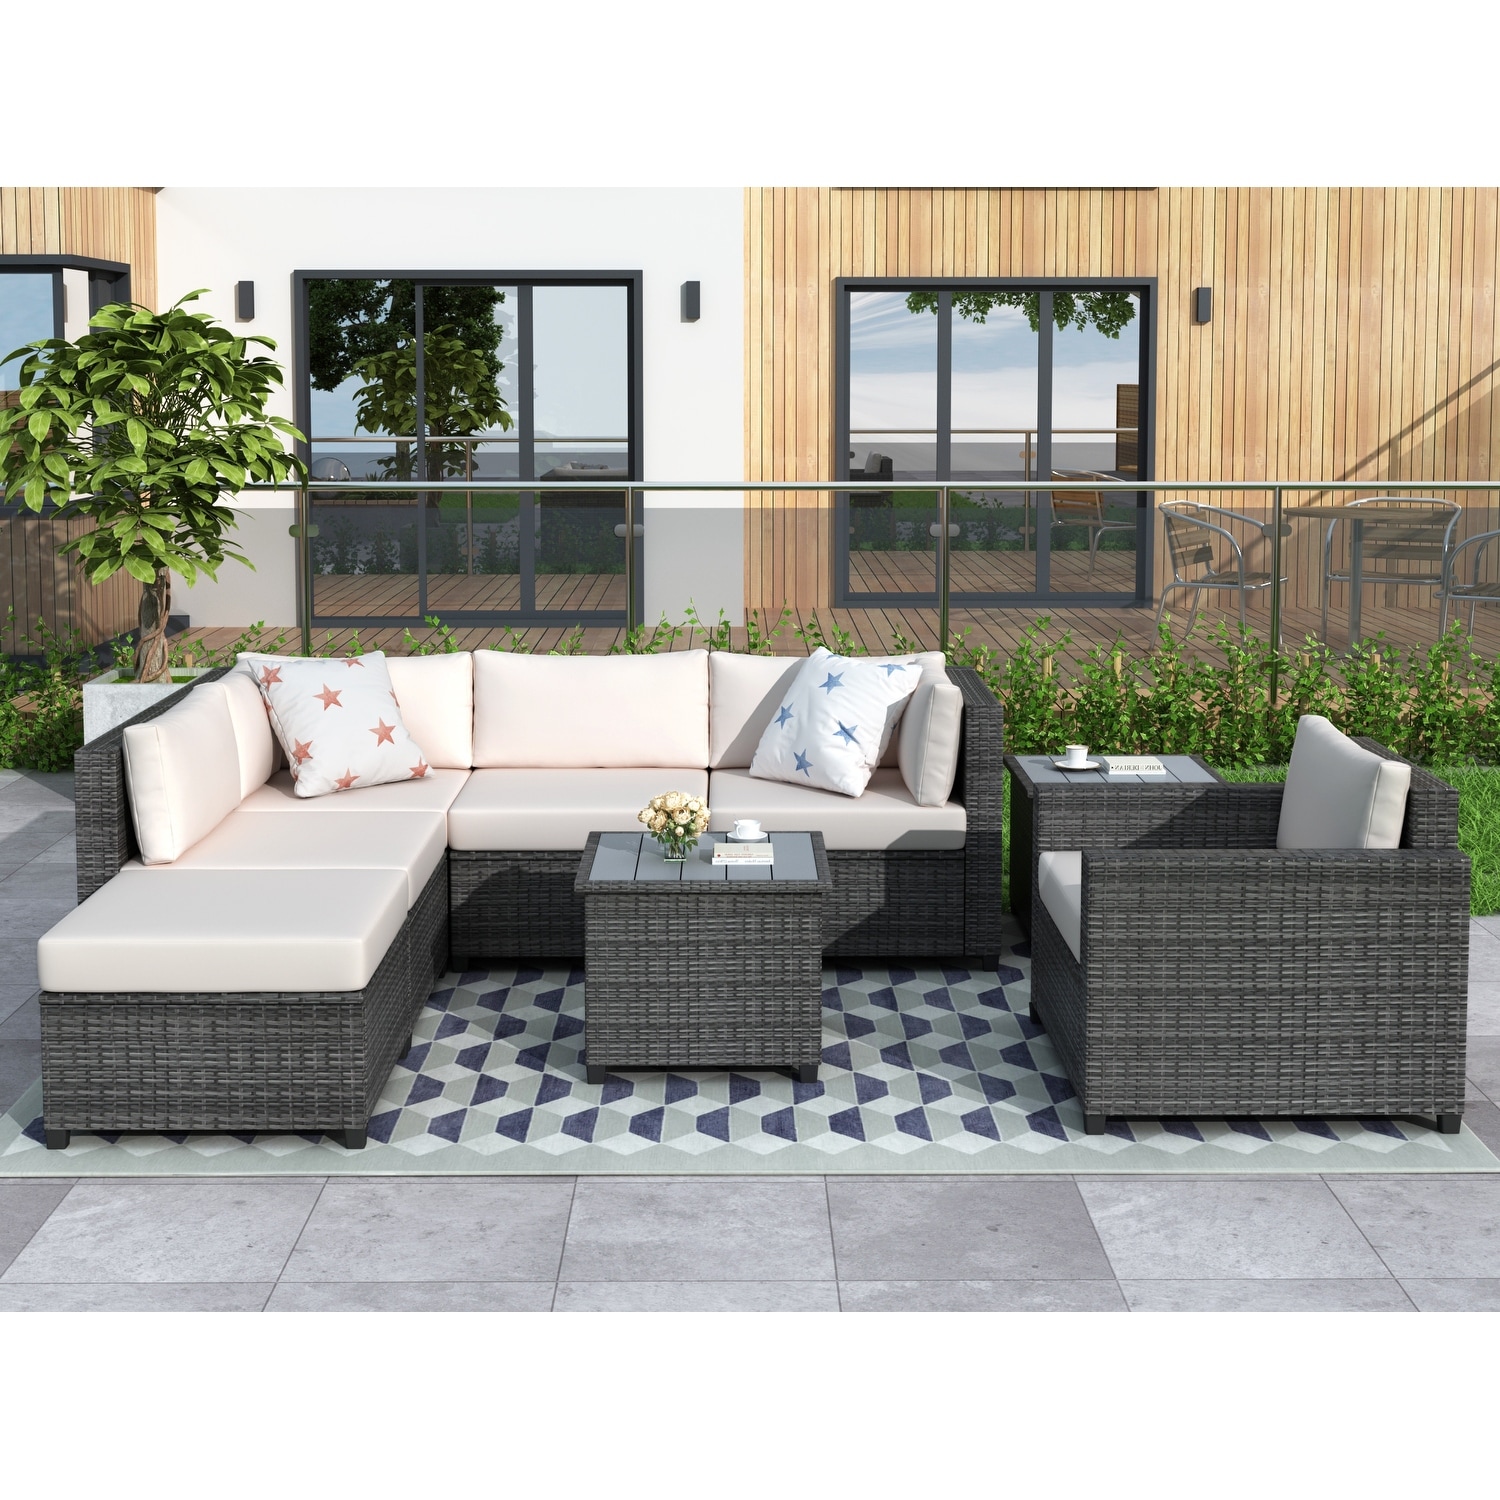 8-piece Rattan Sectional Seating Group With Waterproof Coffee Table